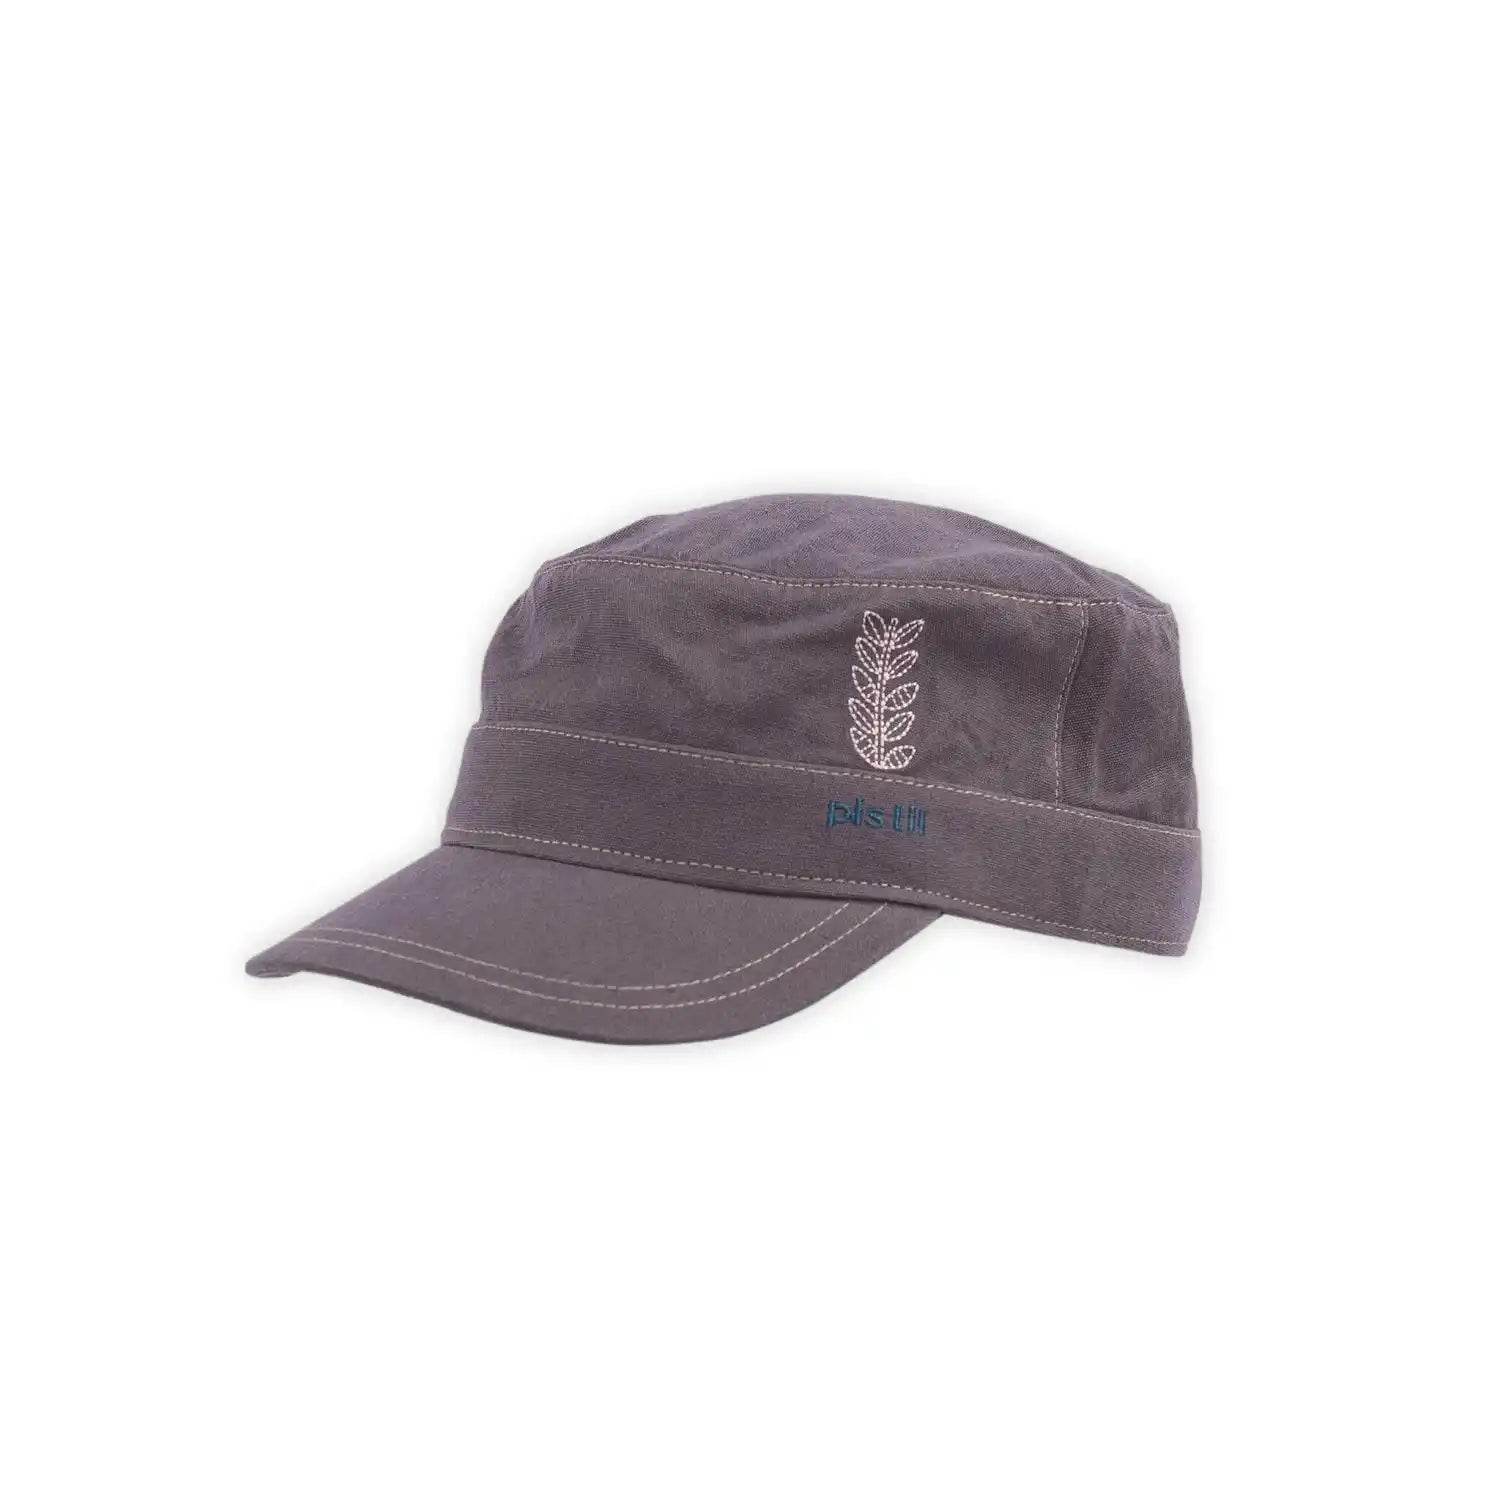 Pistil Ranger Military Cap, Storm, front and side view 